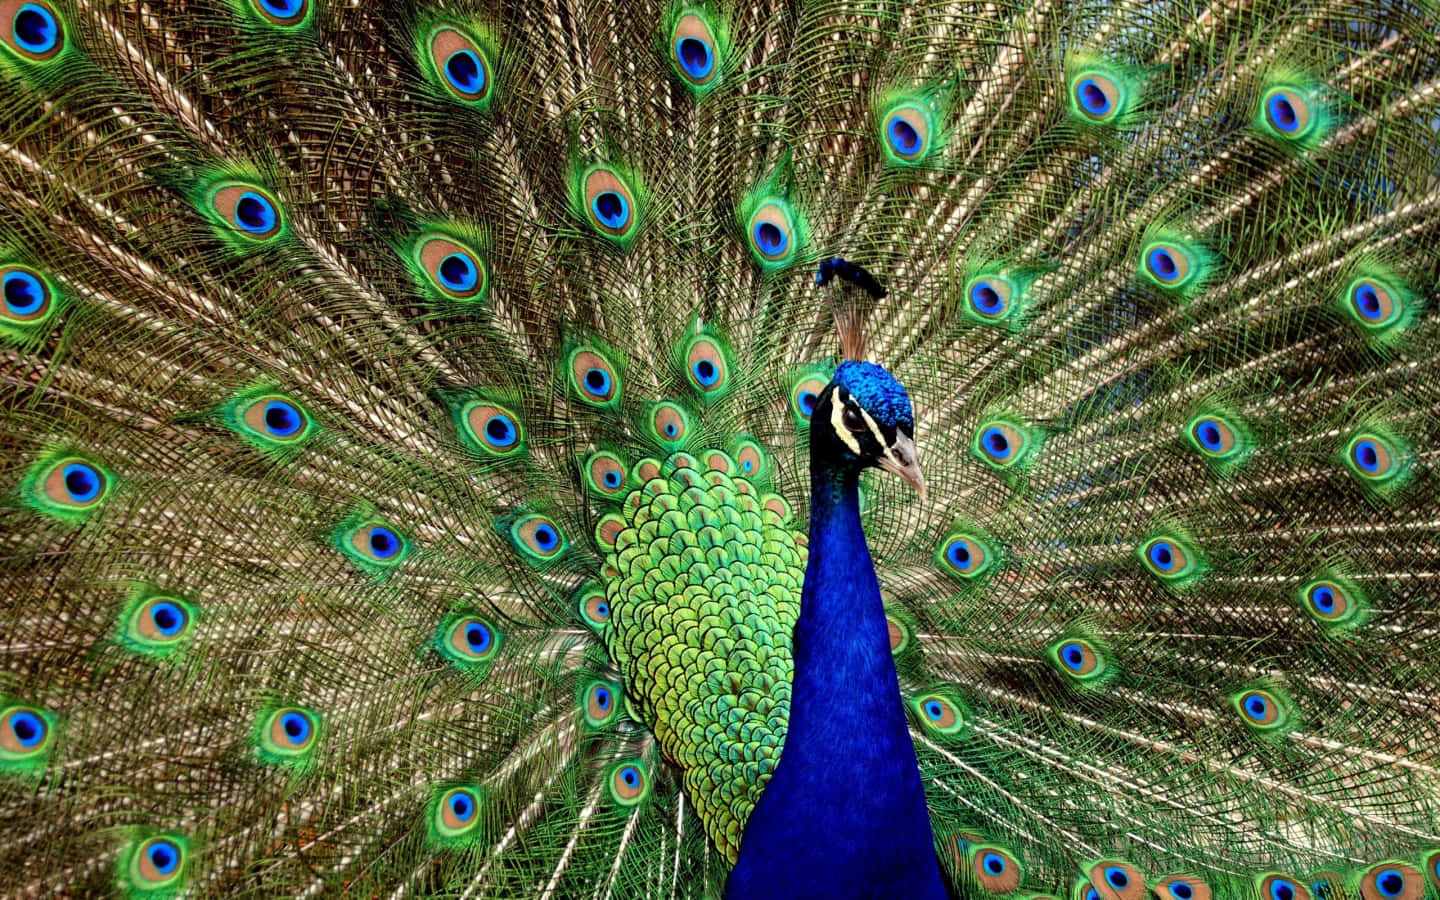 A Peacock Is Displaying Its Feathers